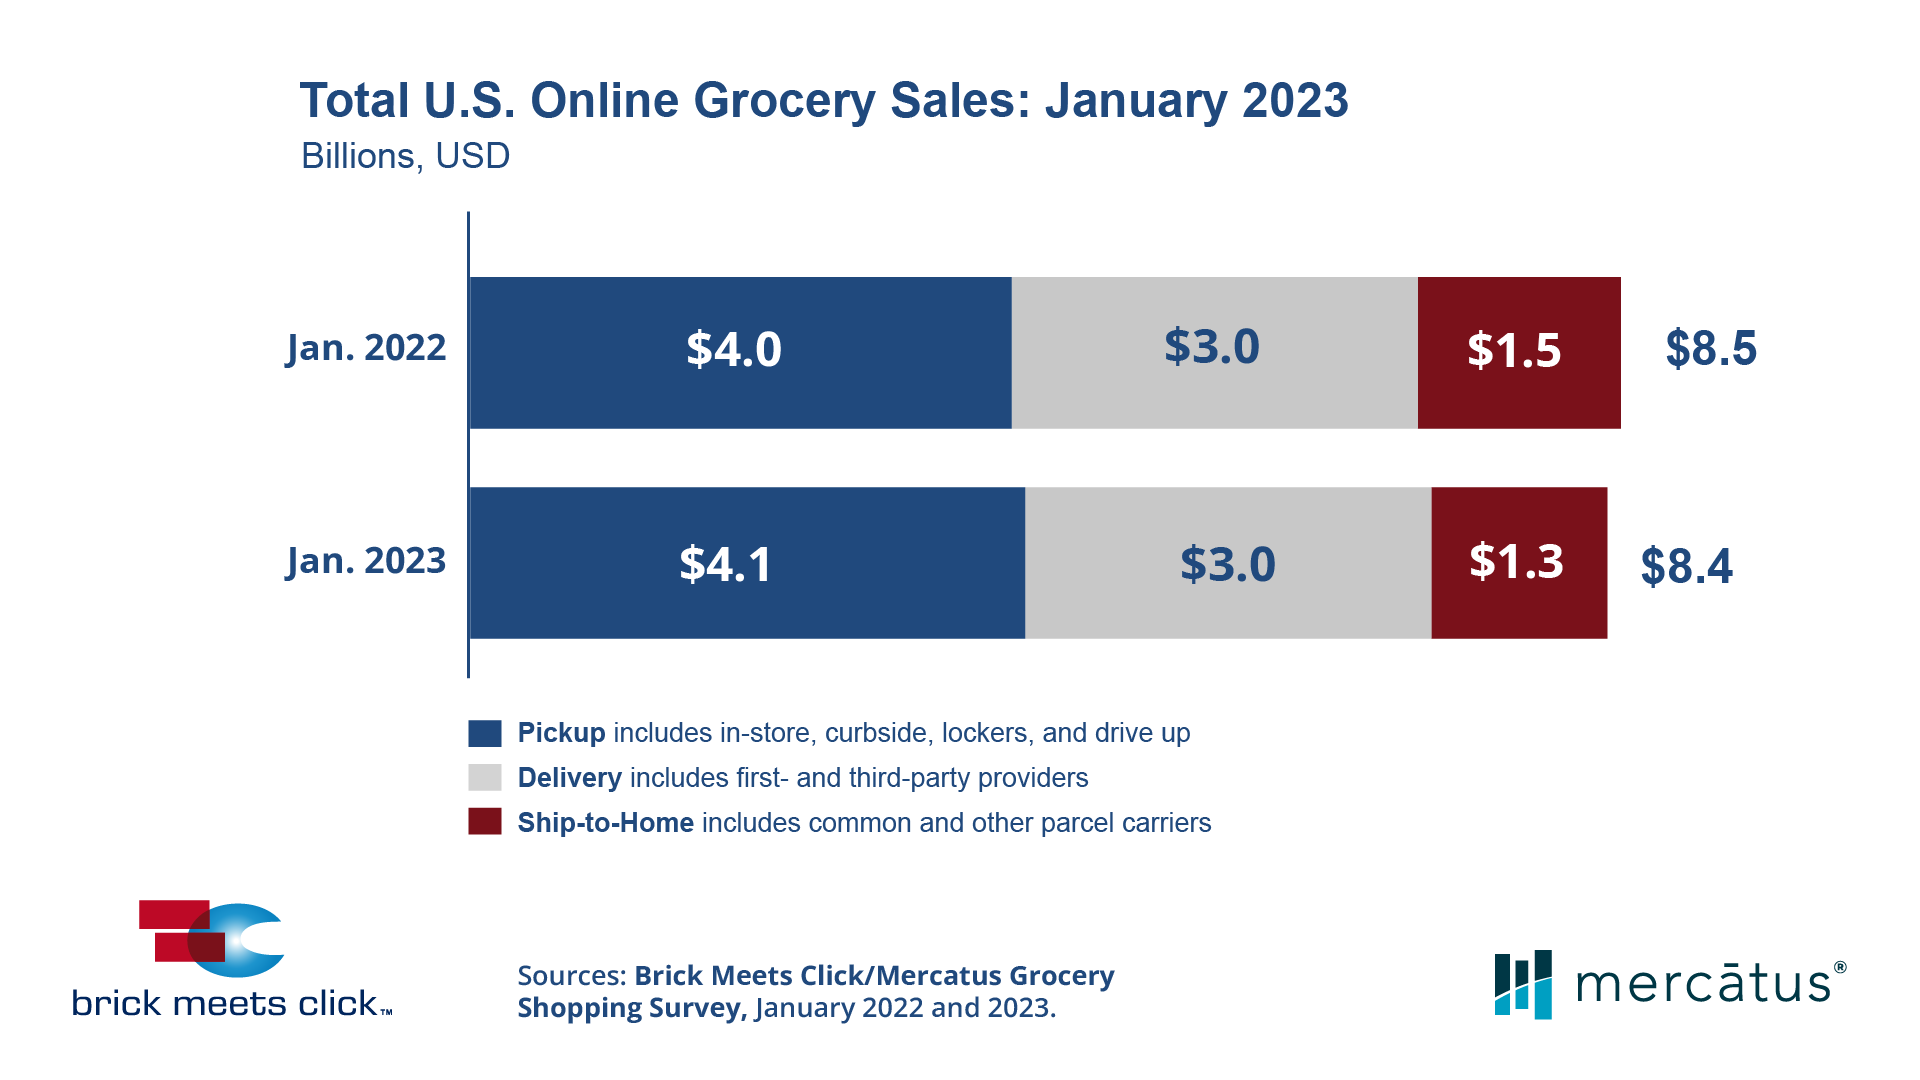 Total US Online Grocery Sales January 2023